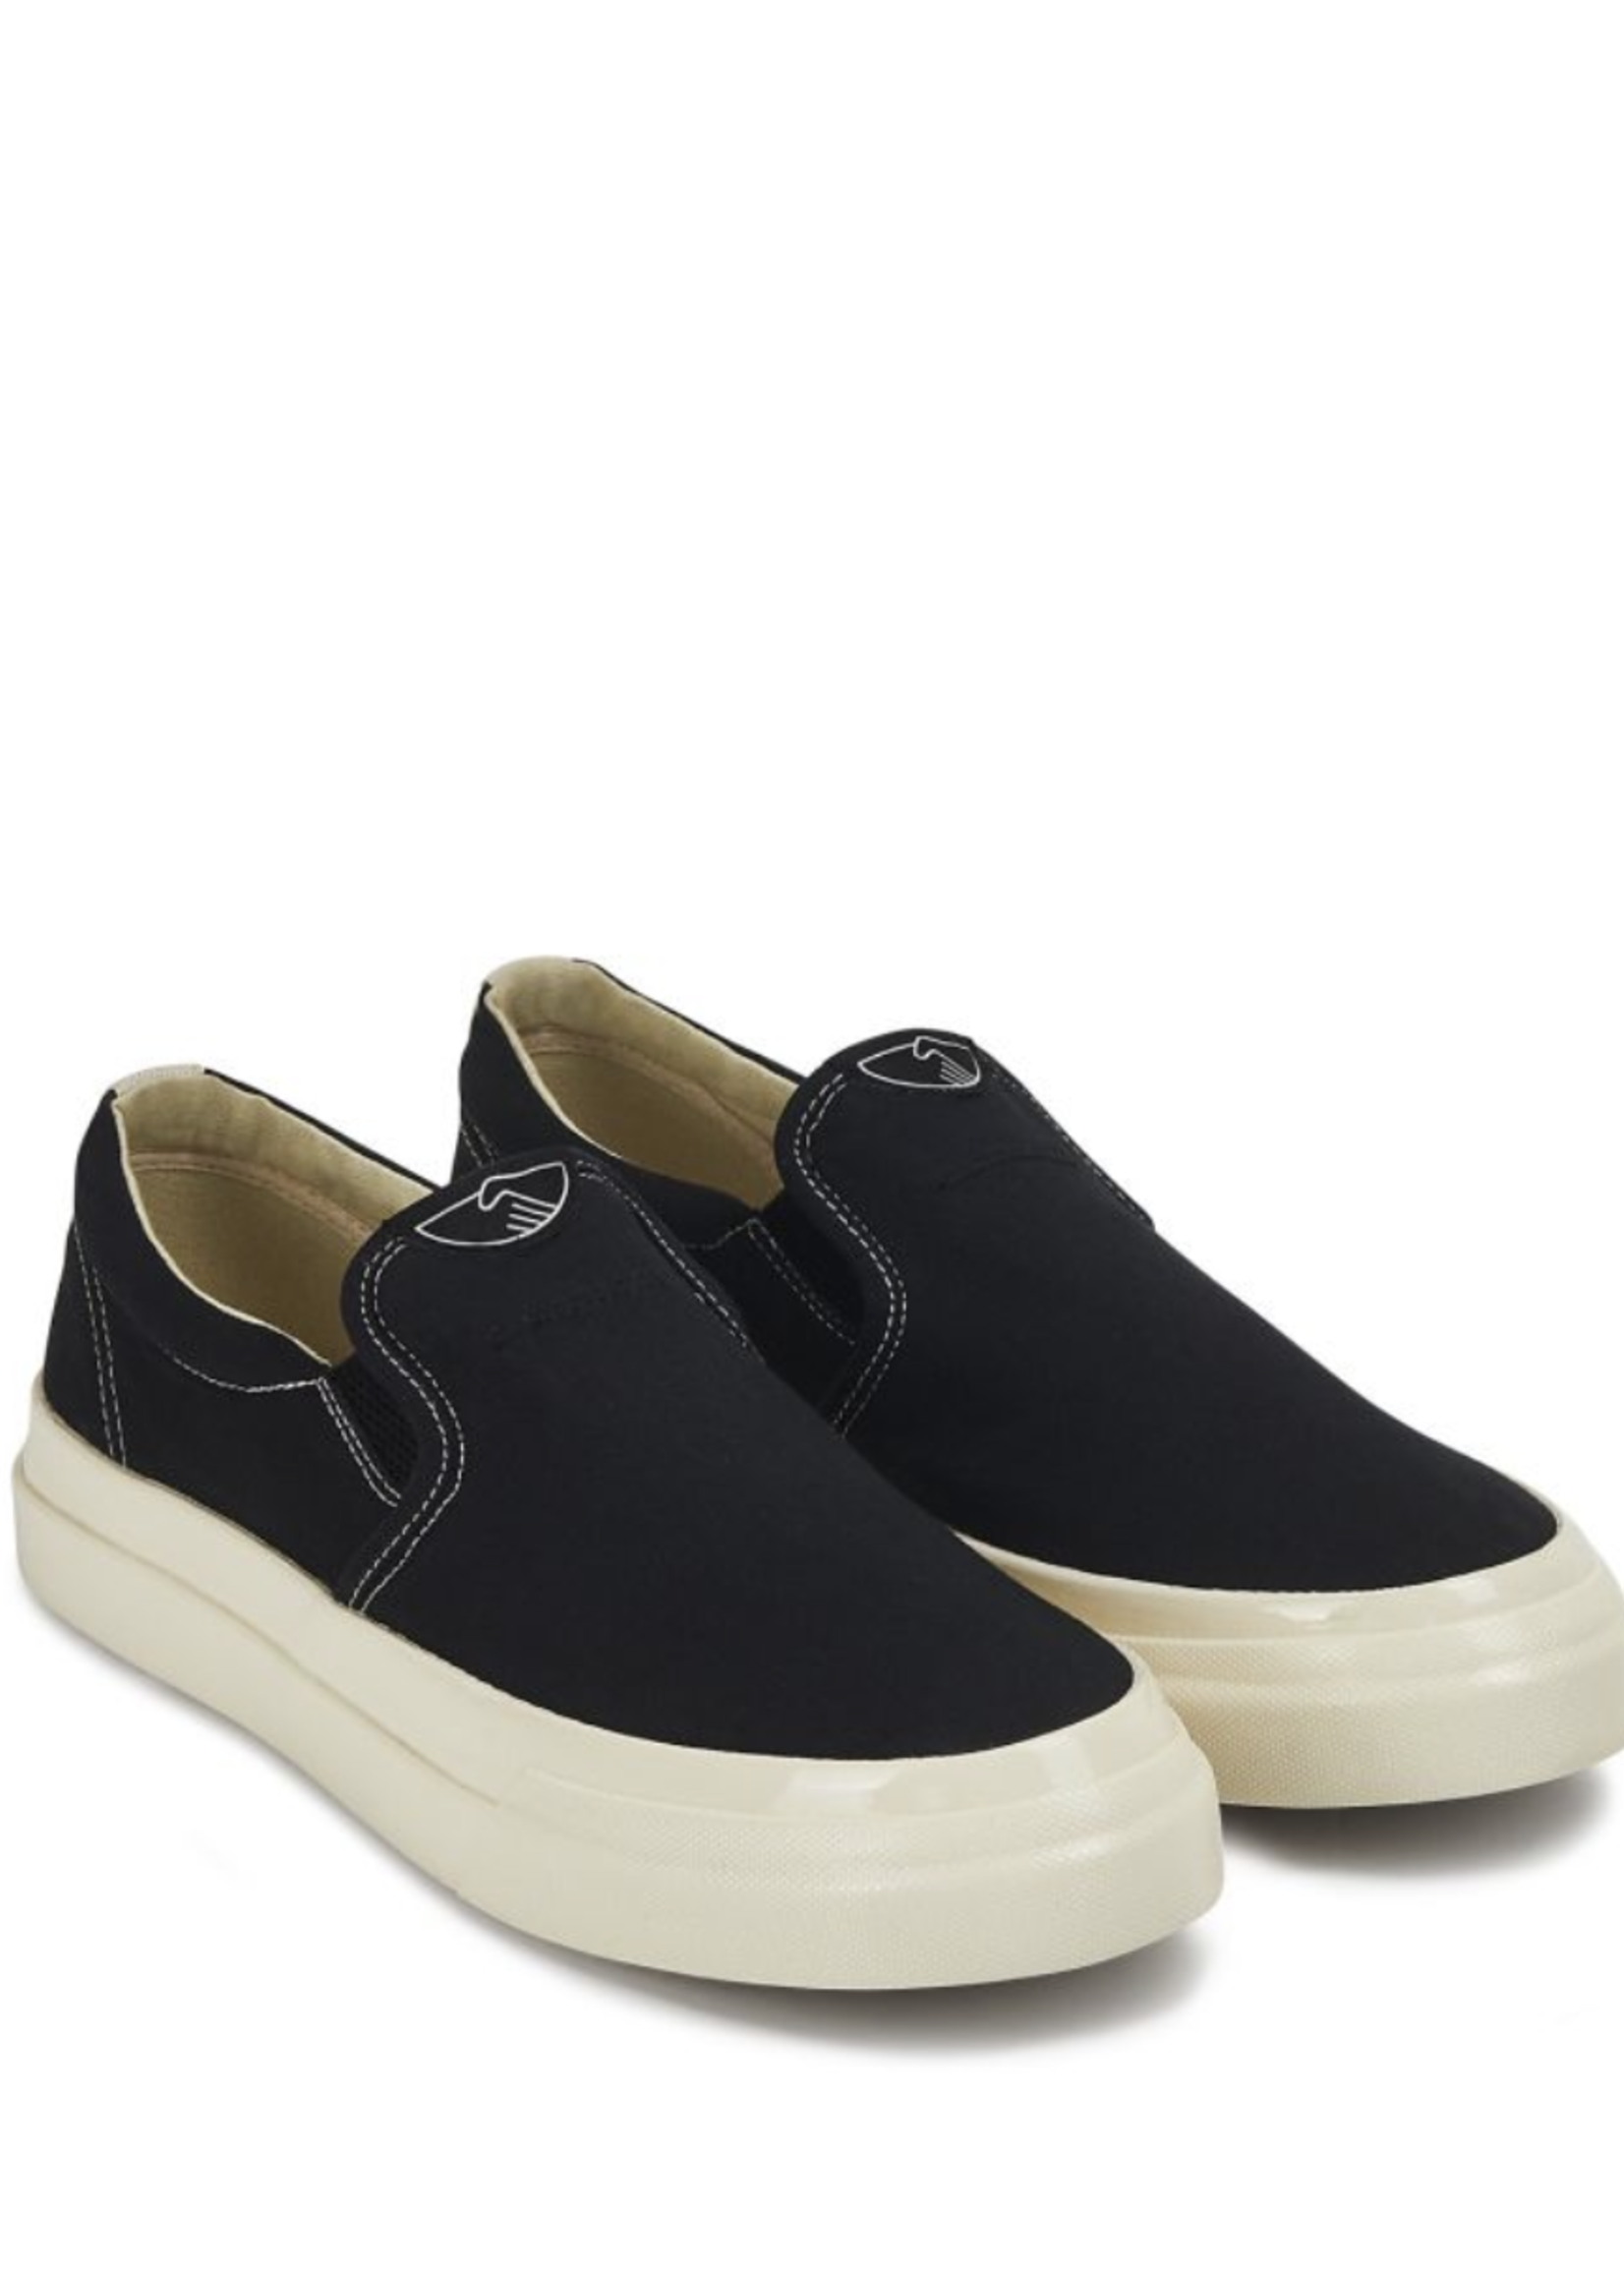 Stepney Workers Club Lister Slip-on in Black Canvas